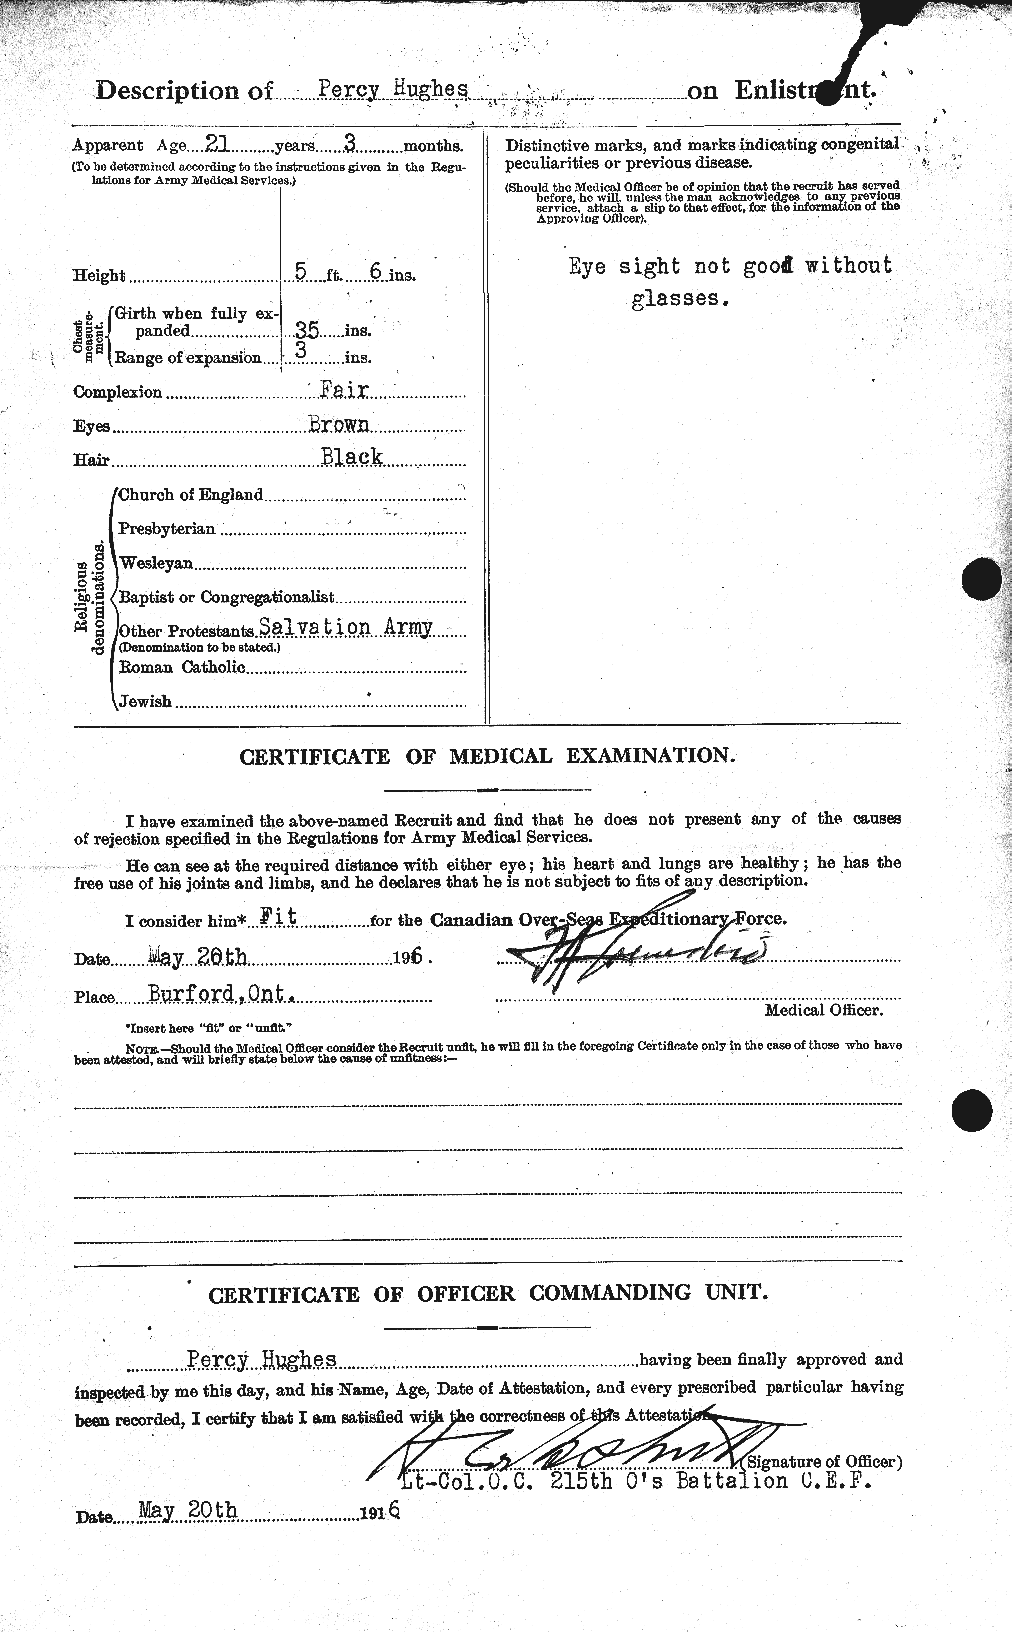 Personnel Records of the First World War - CEF 404152b